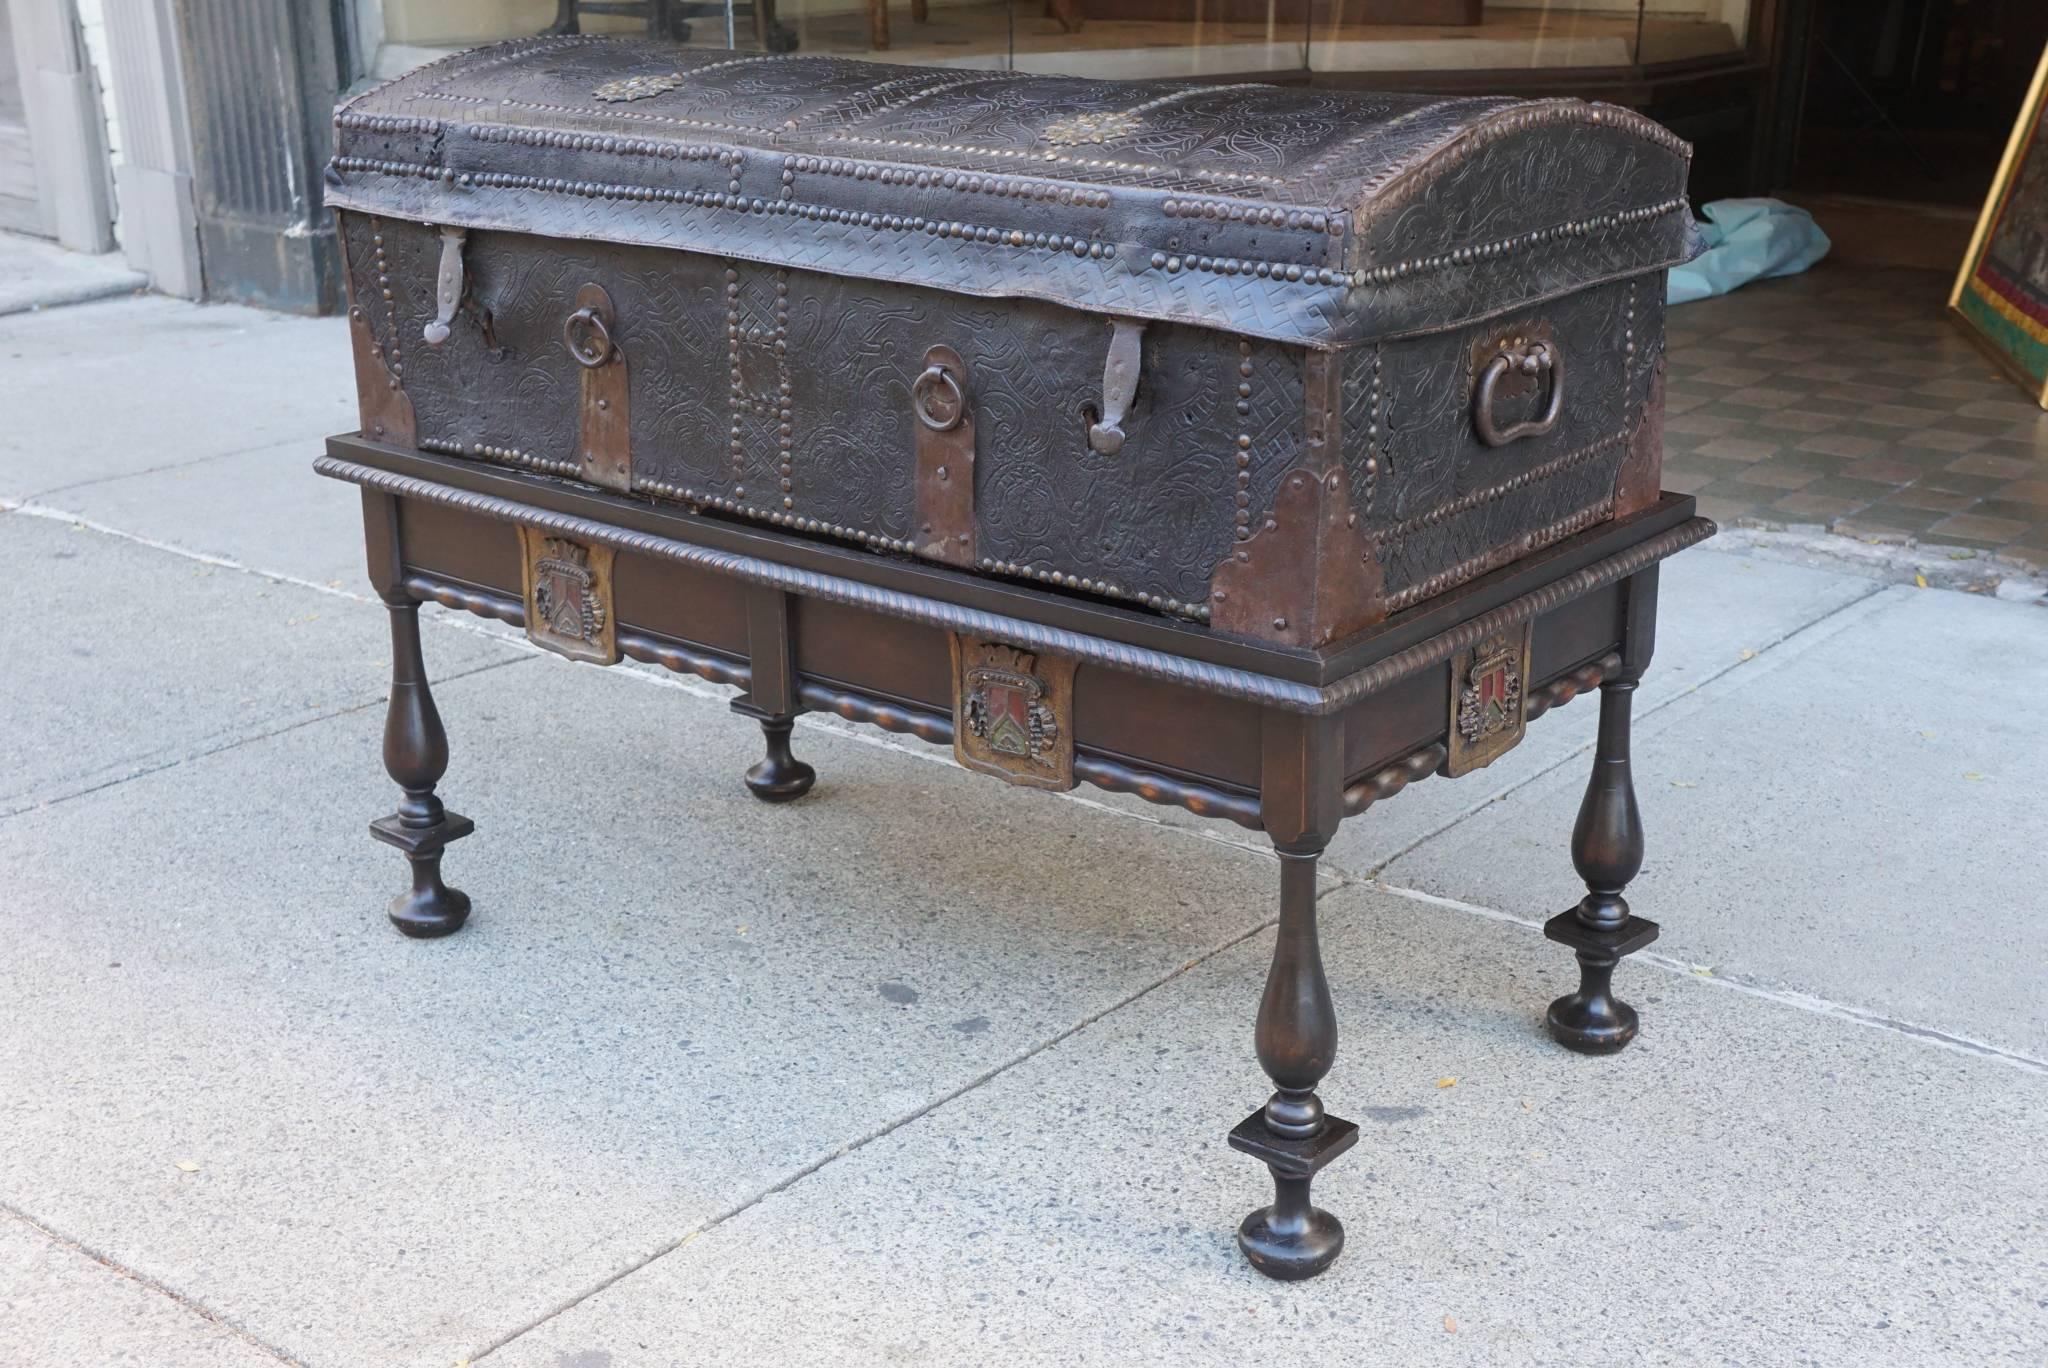 This interesting period trunk, circa 1680-1700 is constructed of wood that has been banded in iron then covered with embossed leather and brass tacks and spandrels creating a decorative and strong travel box for a gentleman’s possessions. The trunks